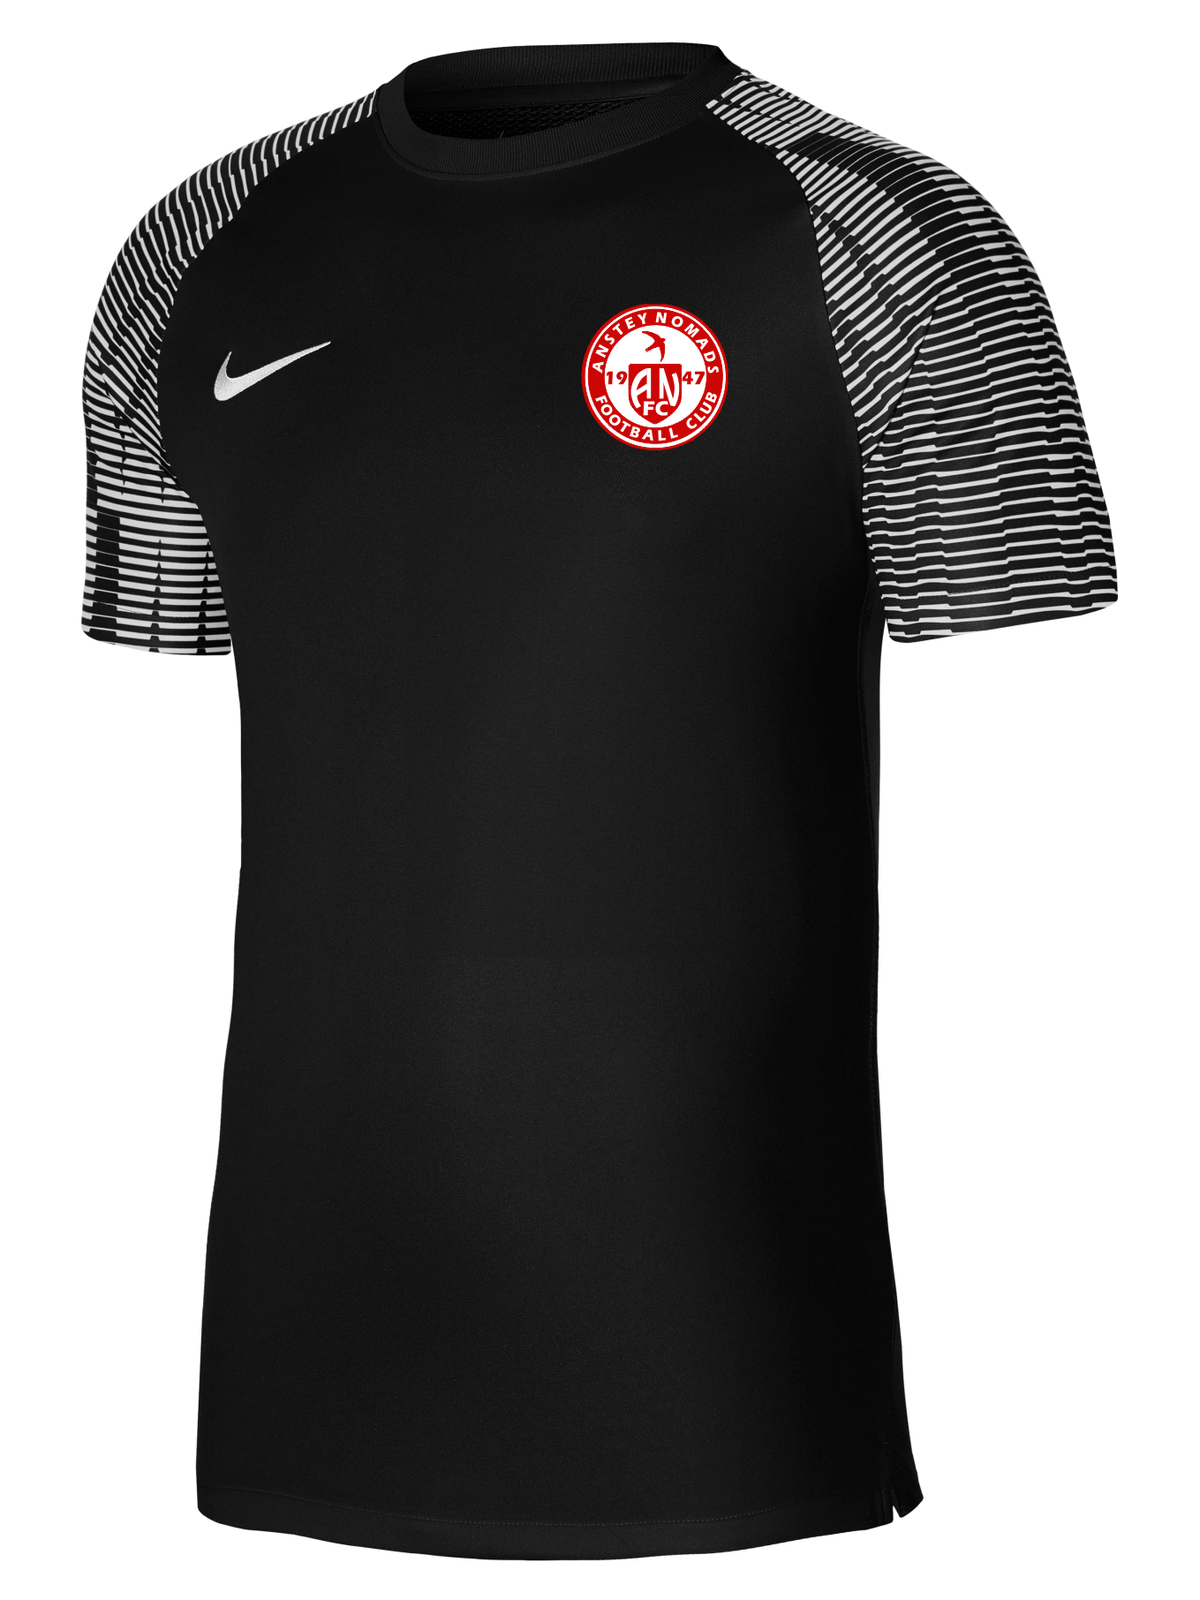 Anstey Nomads - Academy Coaches Top